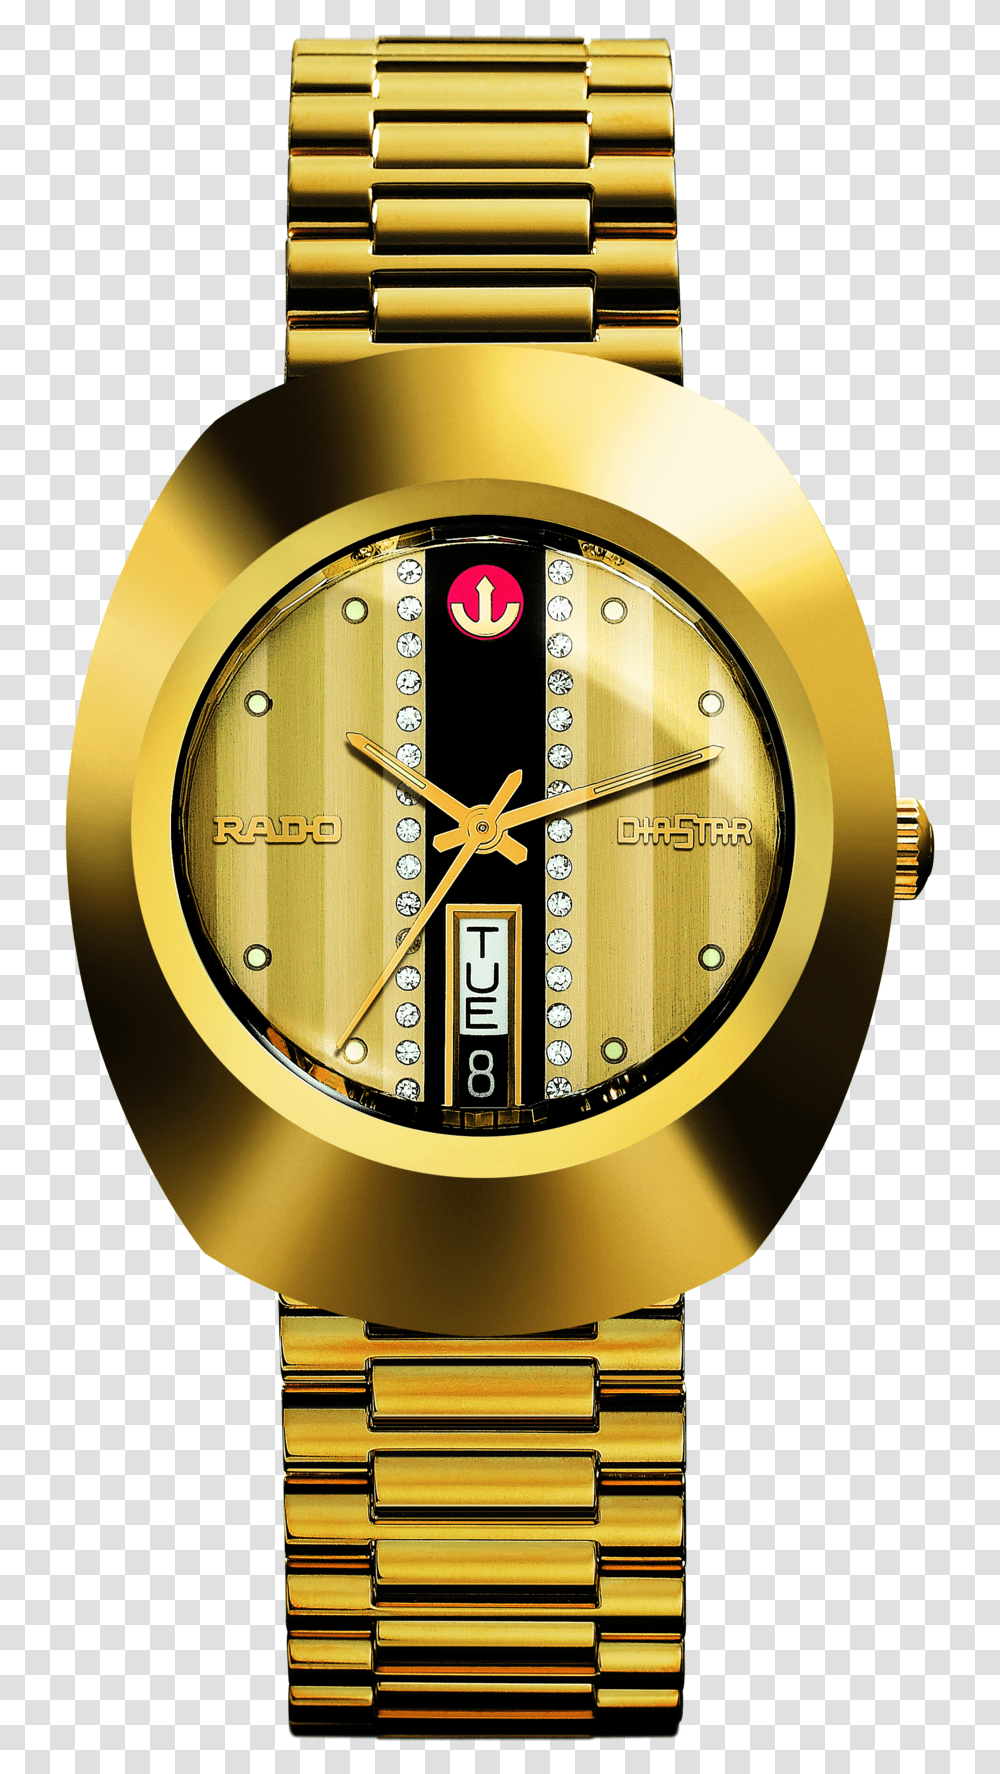 The Original Automatic Rado Watch Price In Qatar, Wristwatch, Clock Tower, Architecture, Building Transparent Png